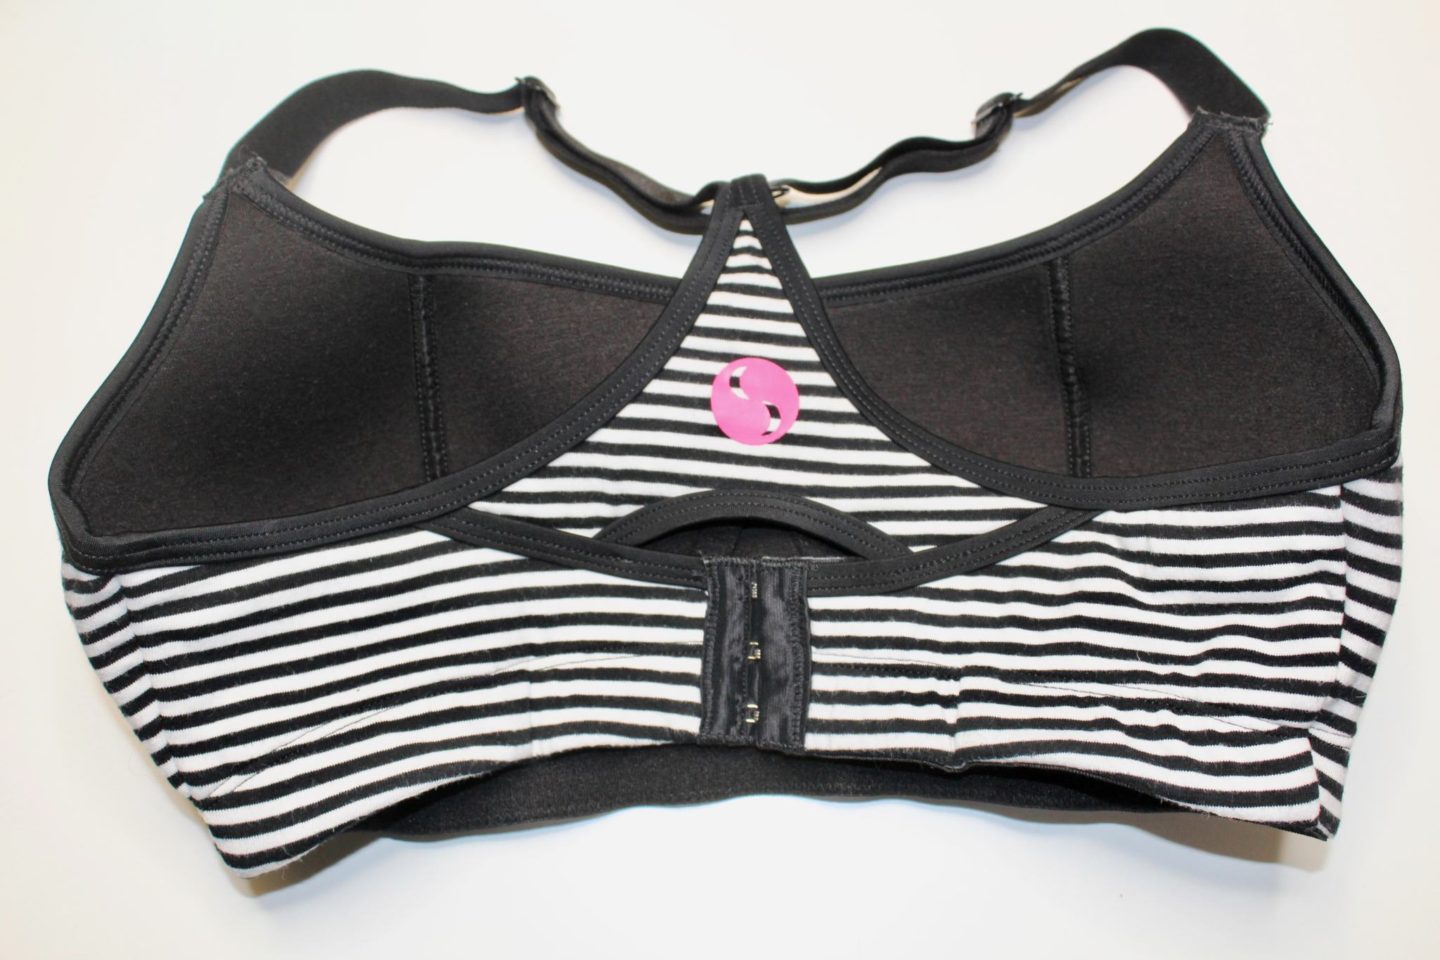 Does This New Sports Bra Hold Up? (It's Modelled After a Breastfeeding Bra.)  - Fitness Test Drive